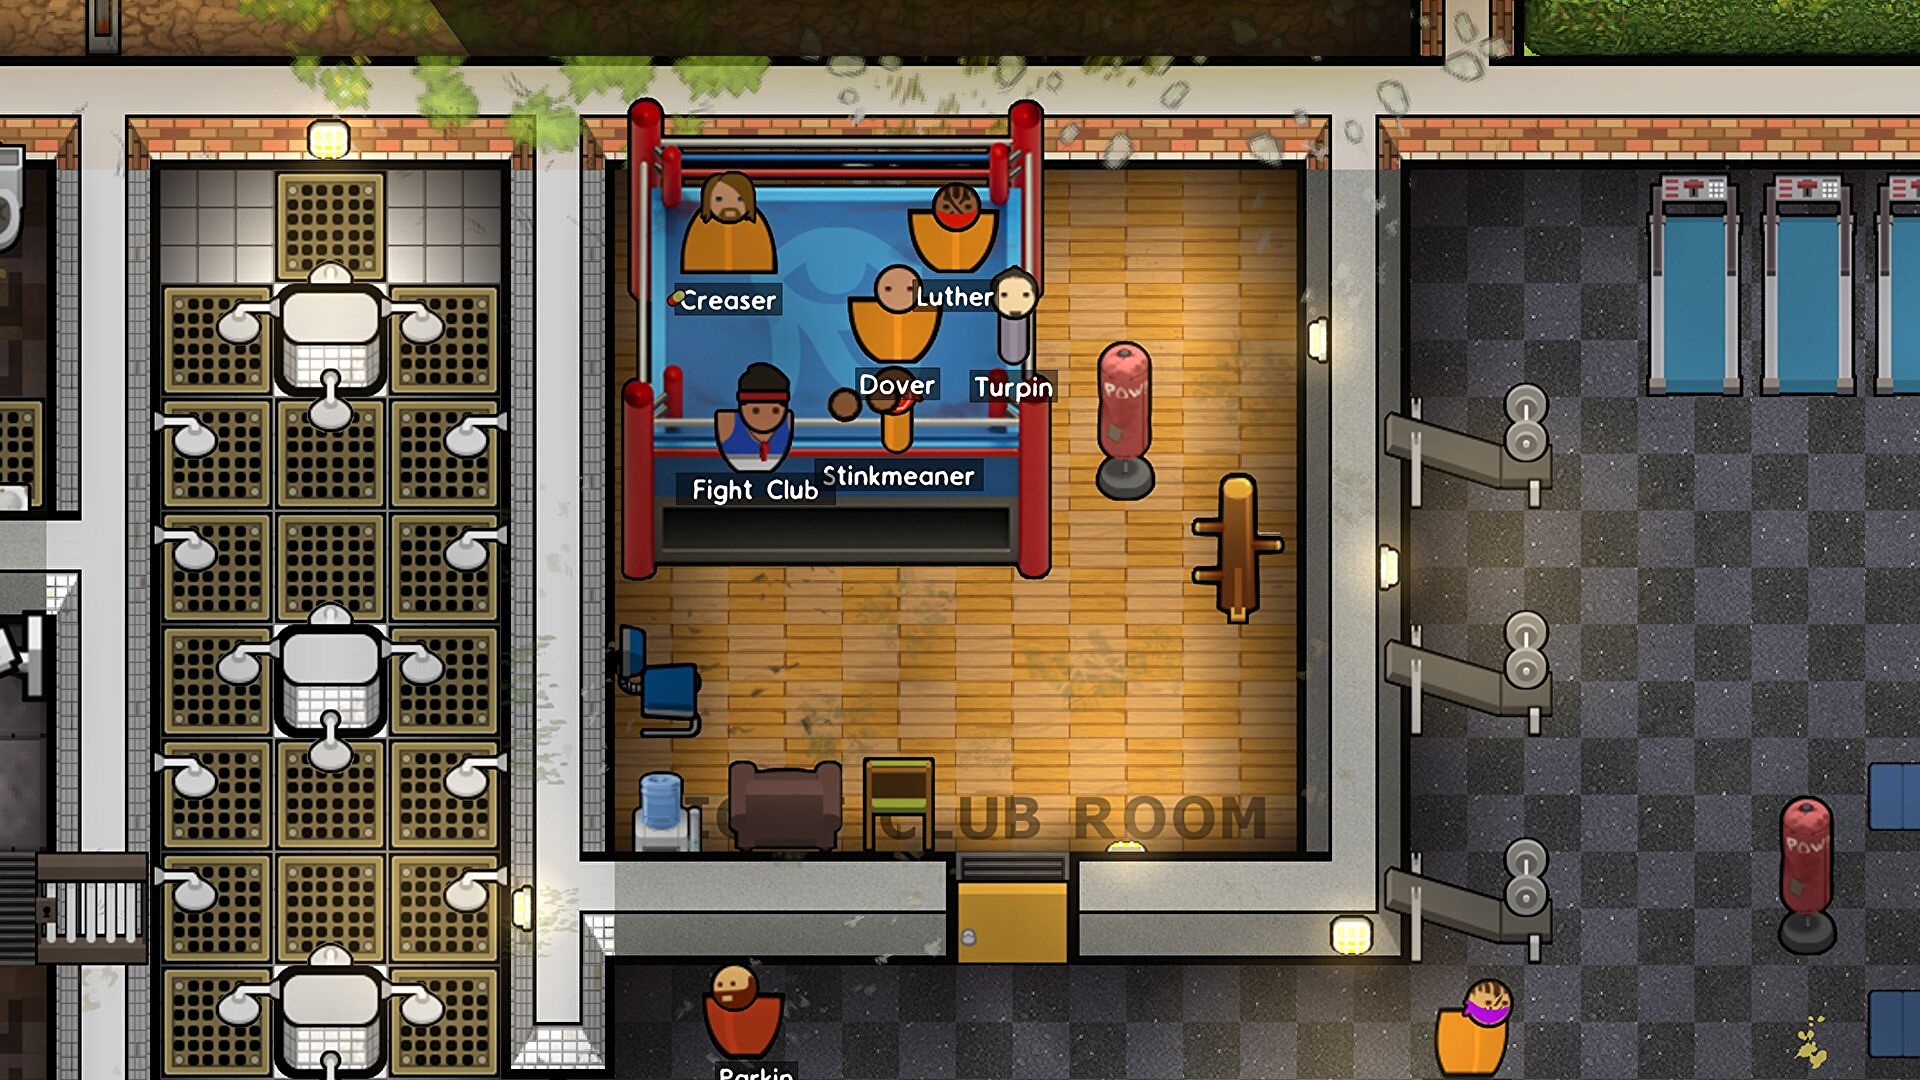 Battle expanded gangs and crooked guards in Prison Architect's Gangs DLC